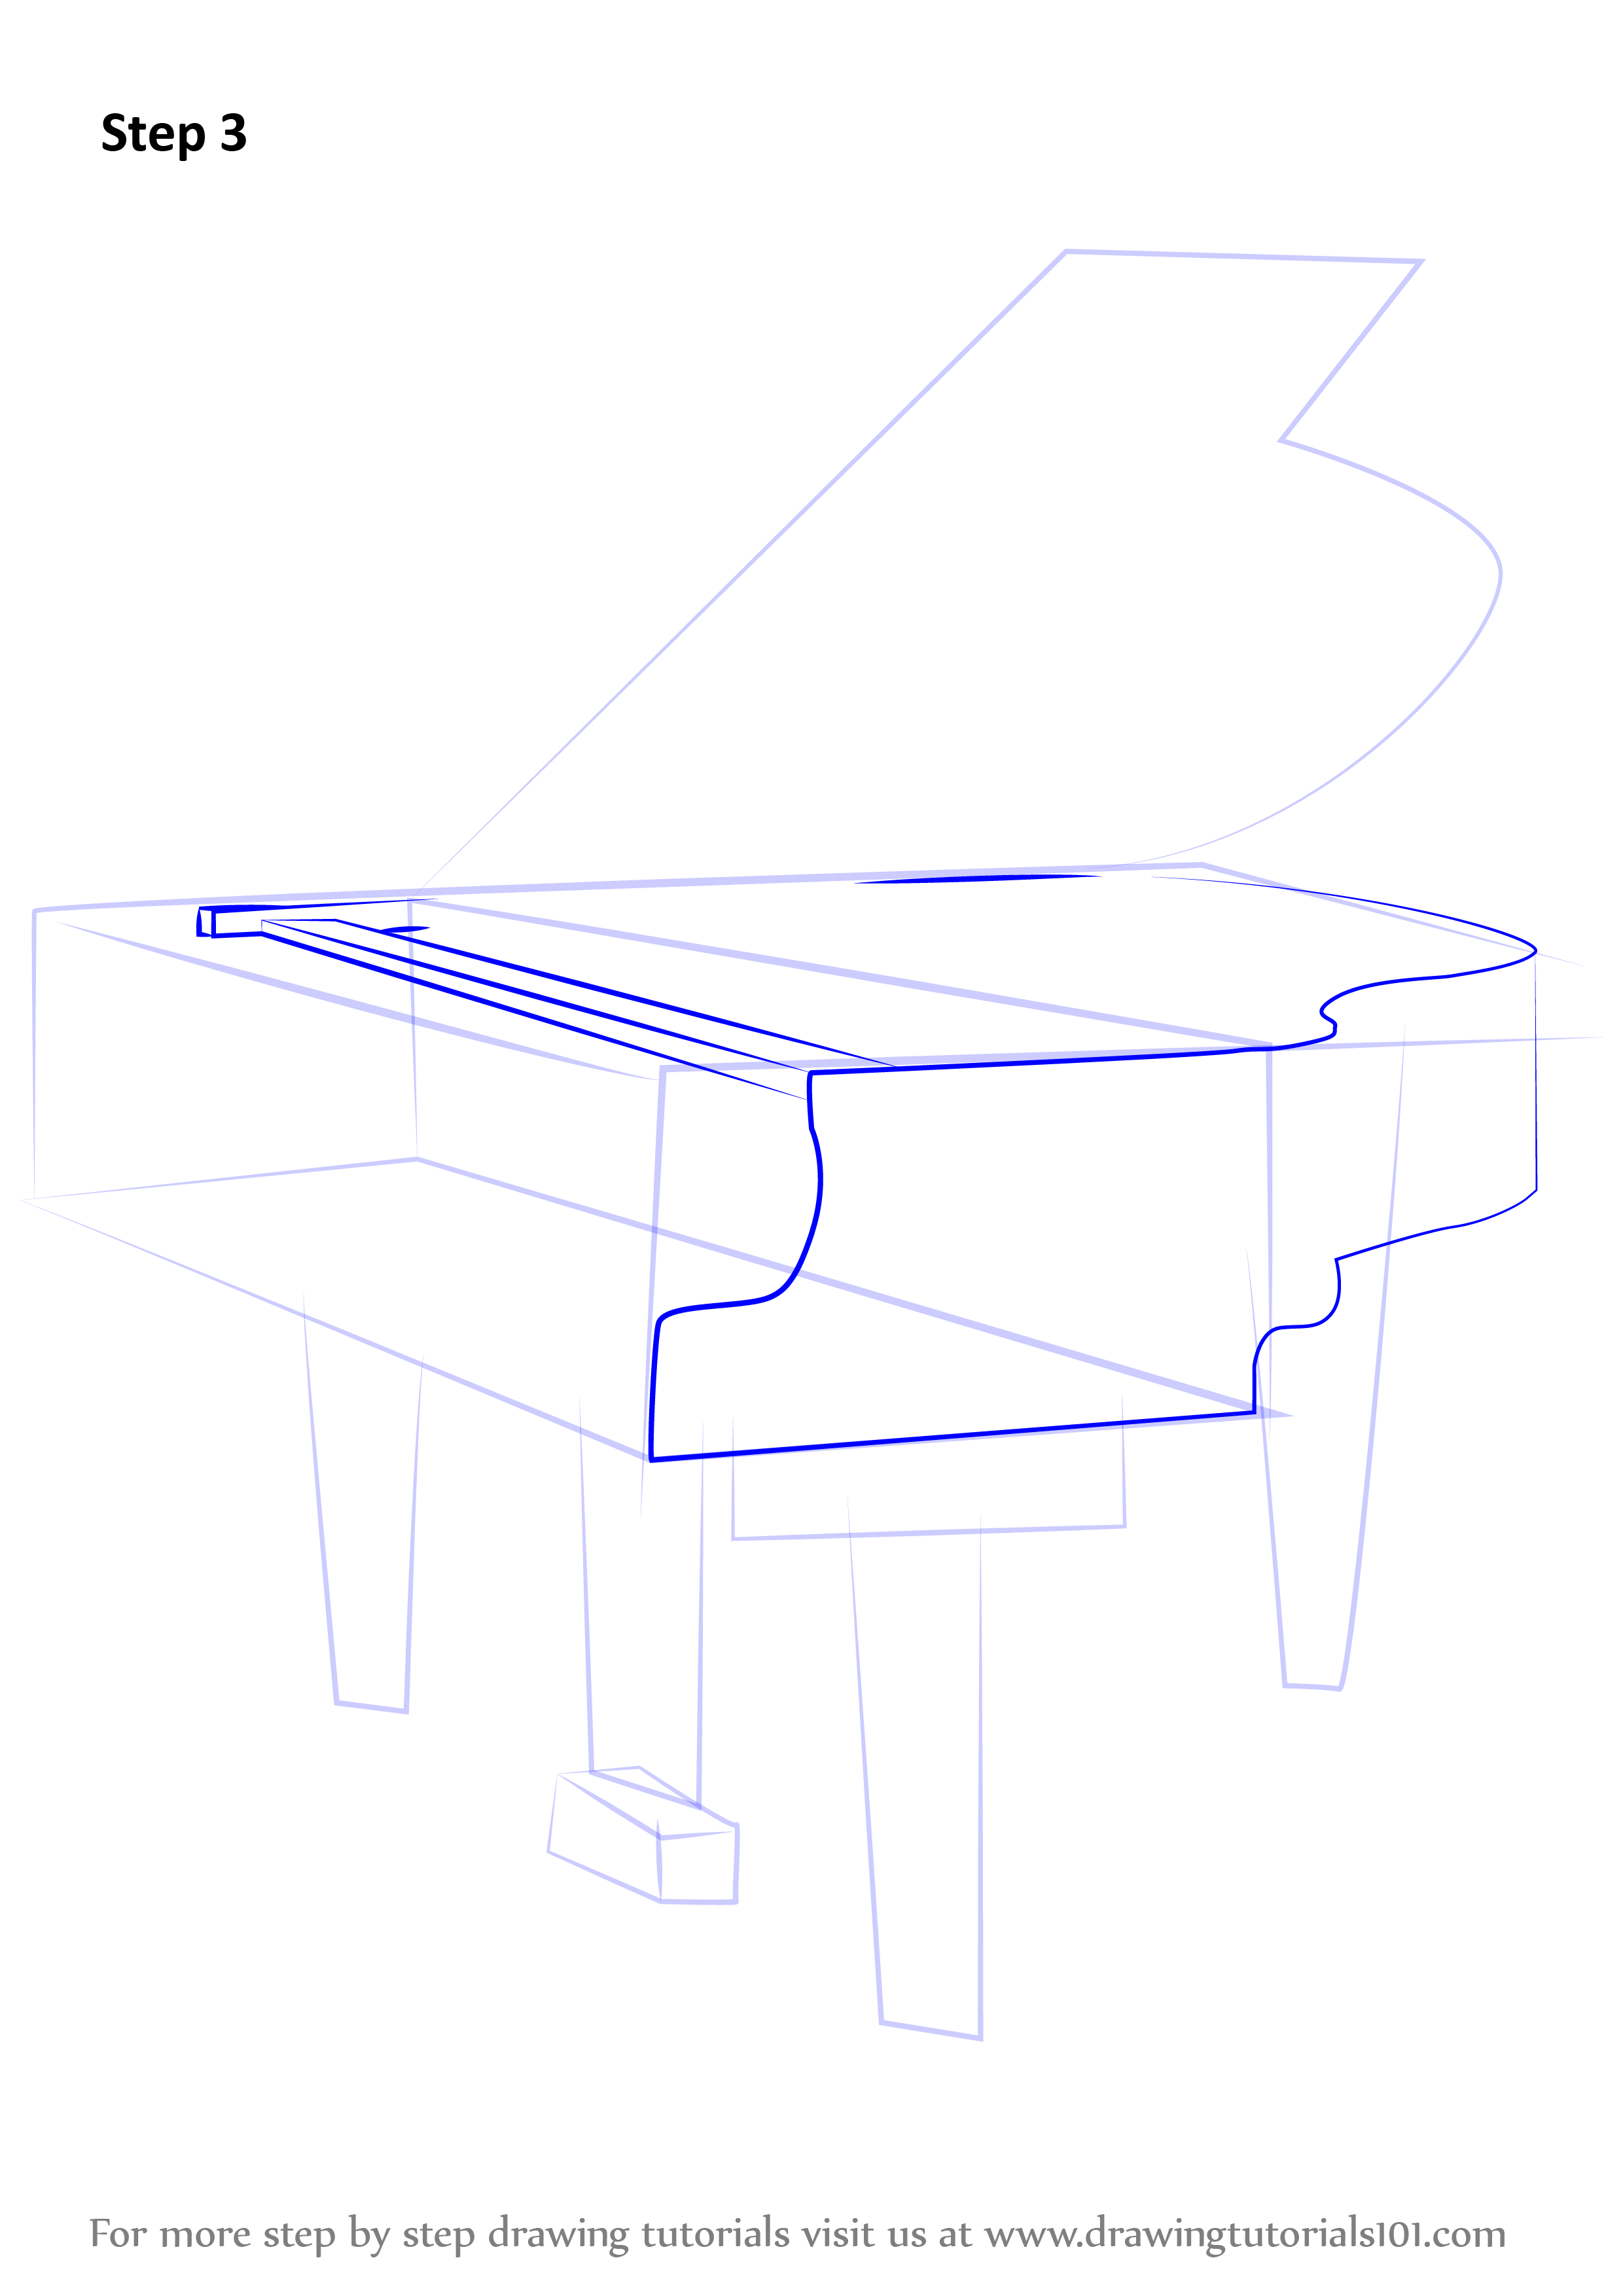 Learn How to Draw a Grand piano (Musical Instruments) Step by Step